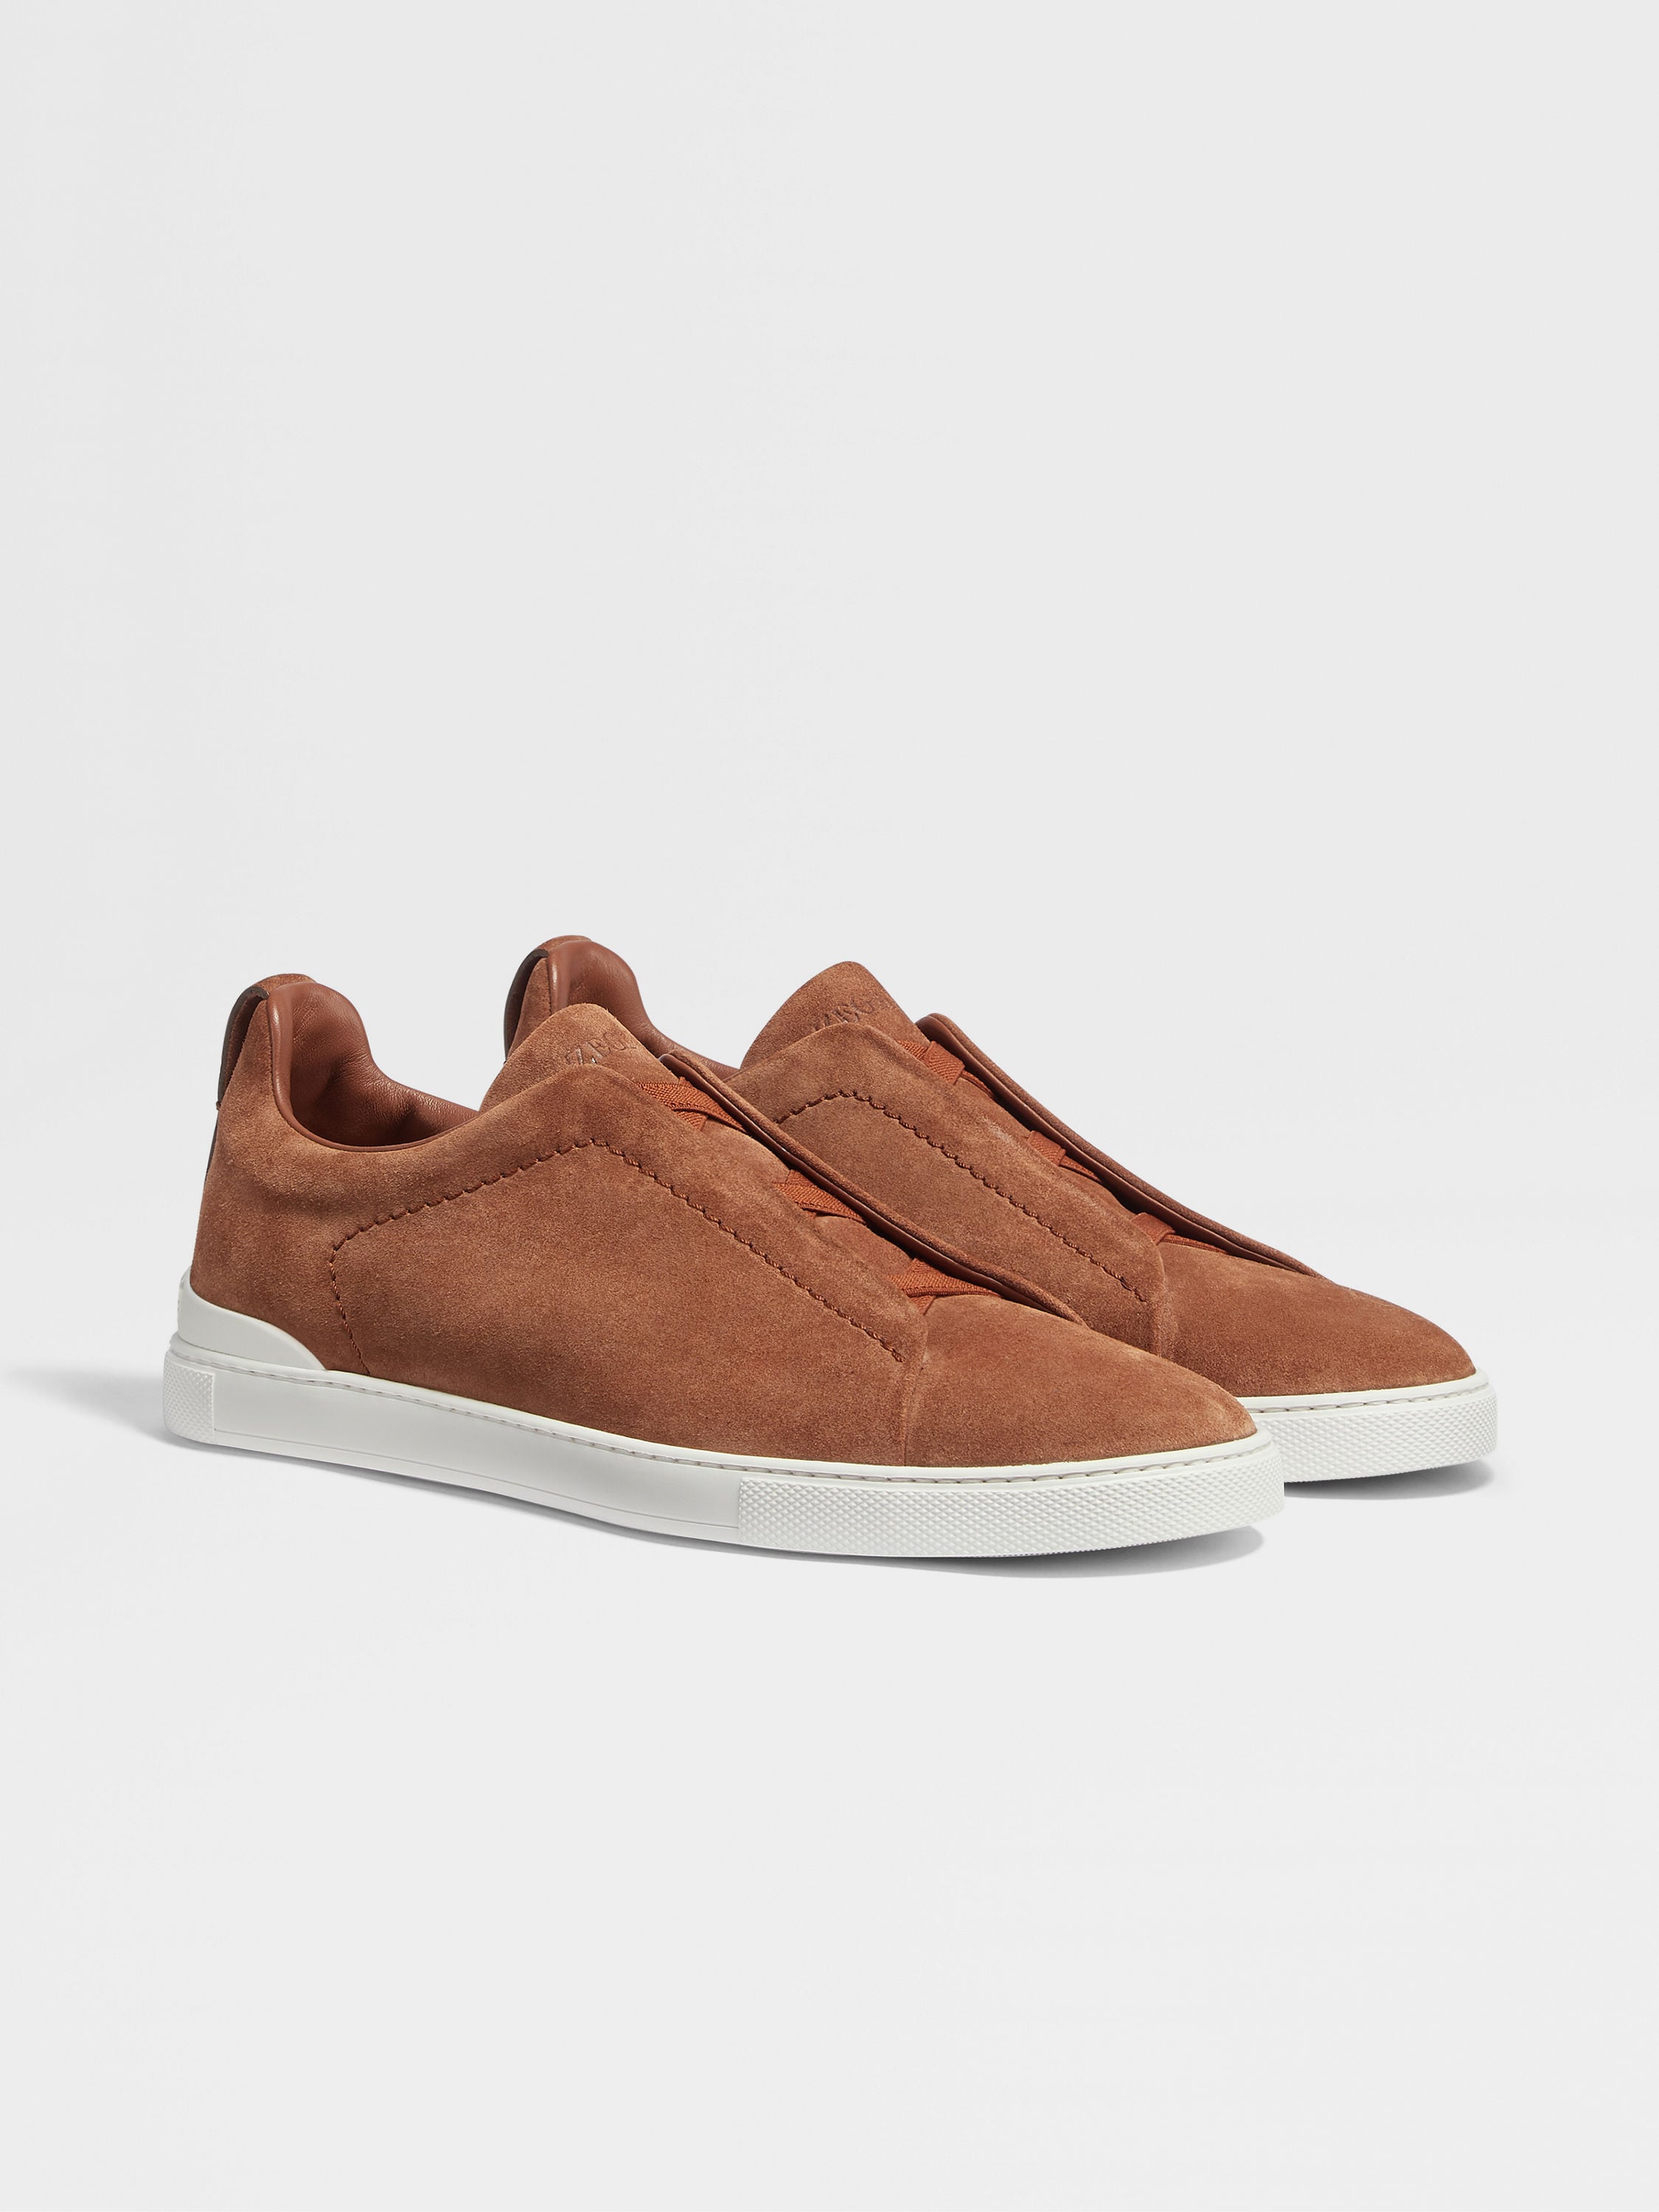 Tobacco Suede Triple Stitch™ Sneakers